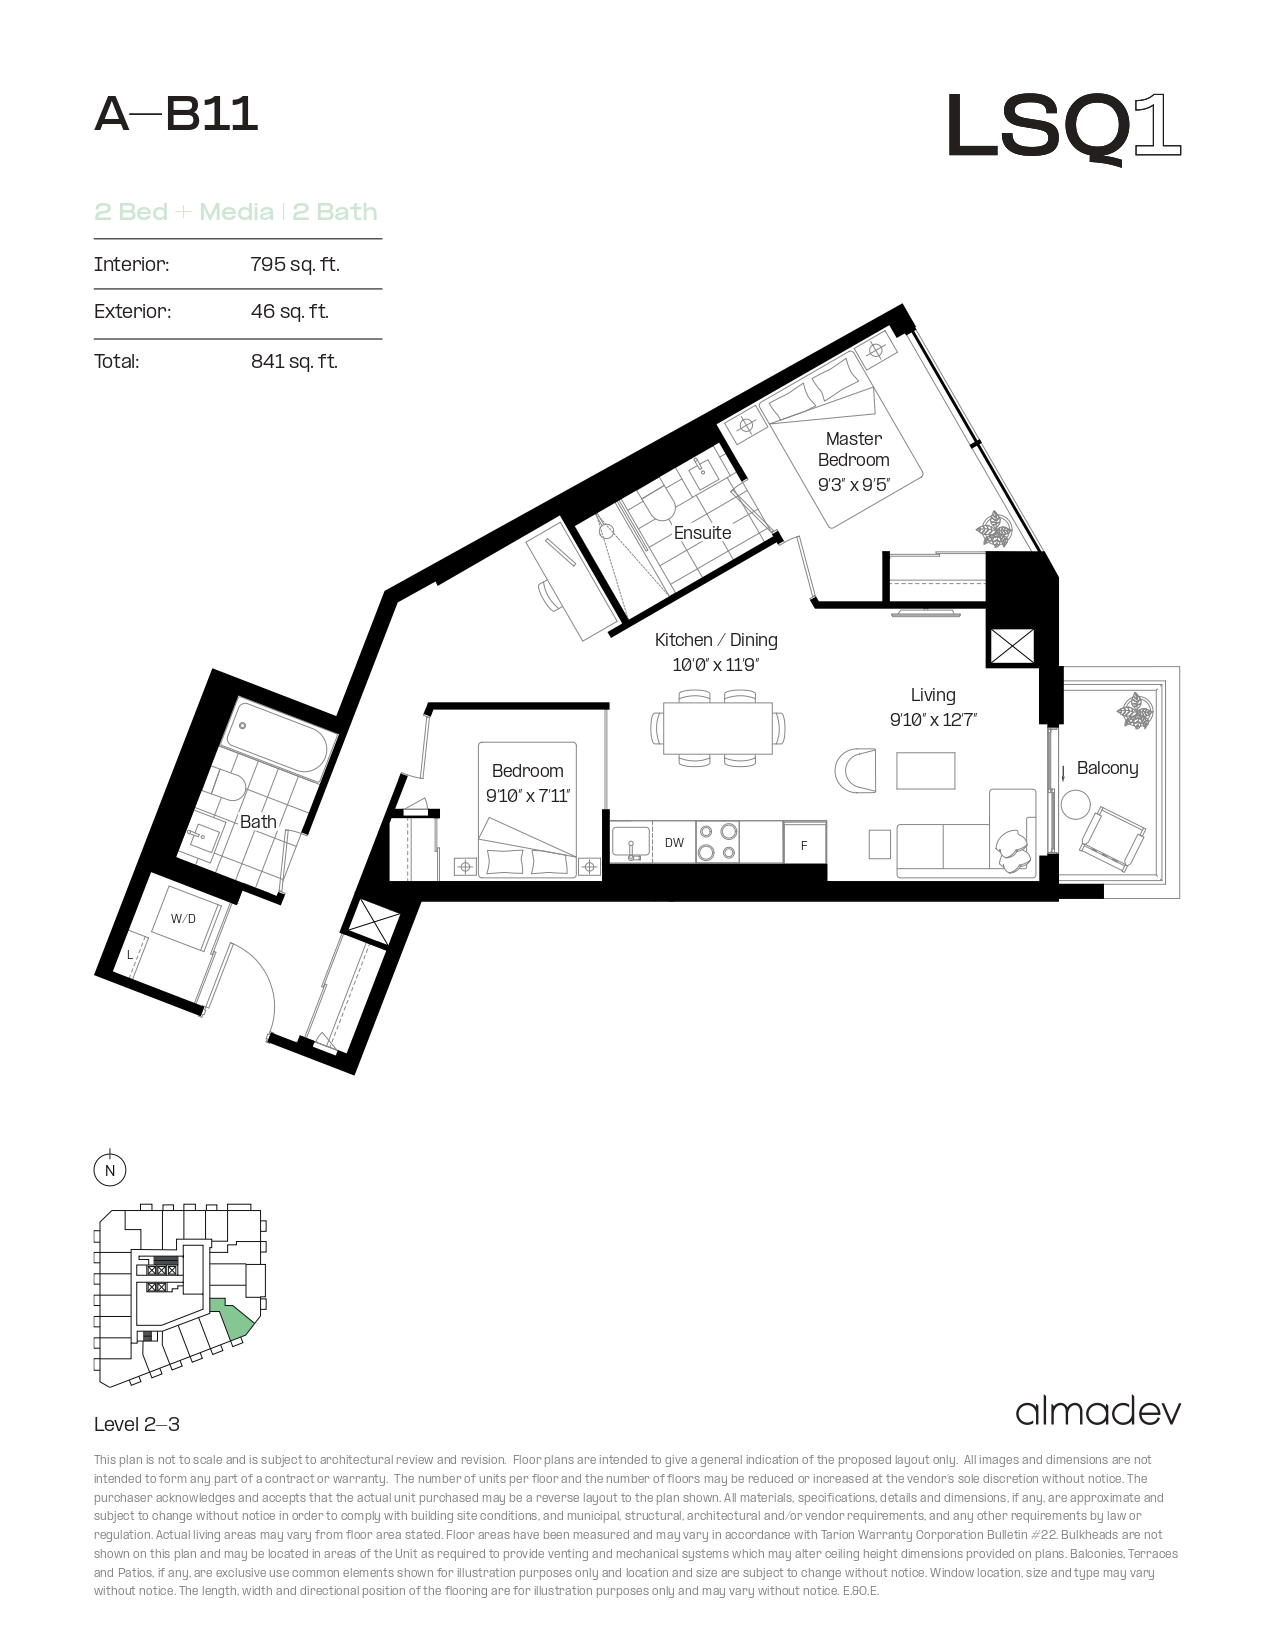 A-B11 Floor Plan of LSQ Condos with undefined beds